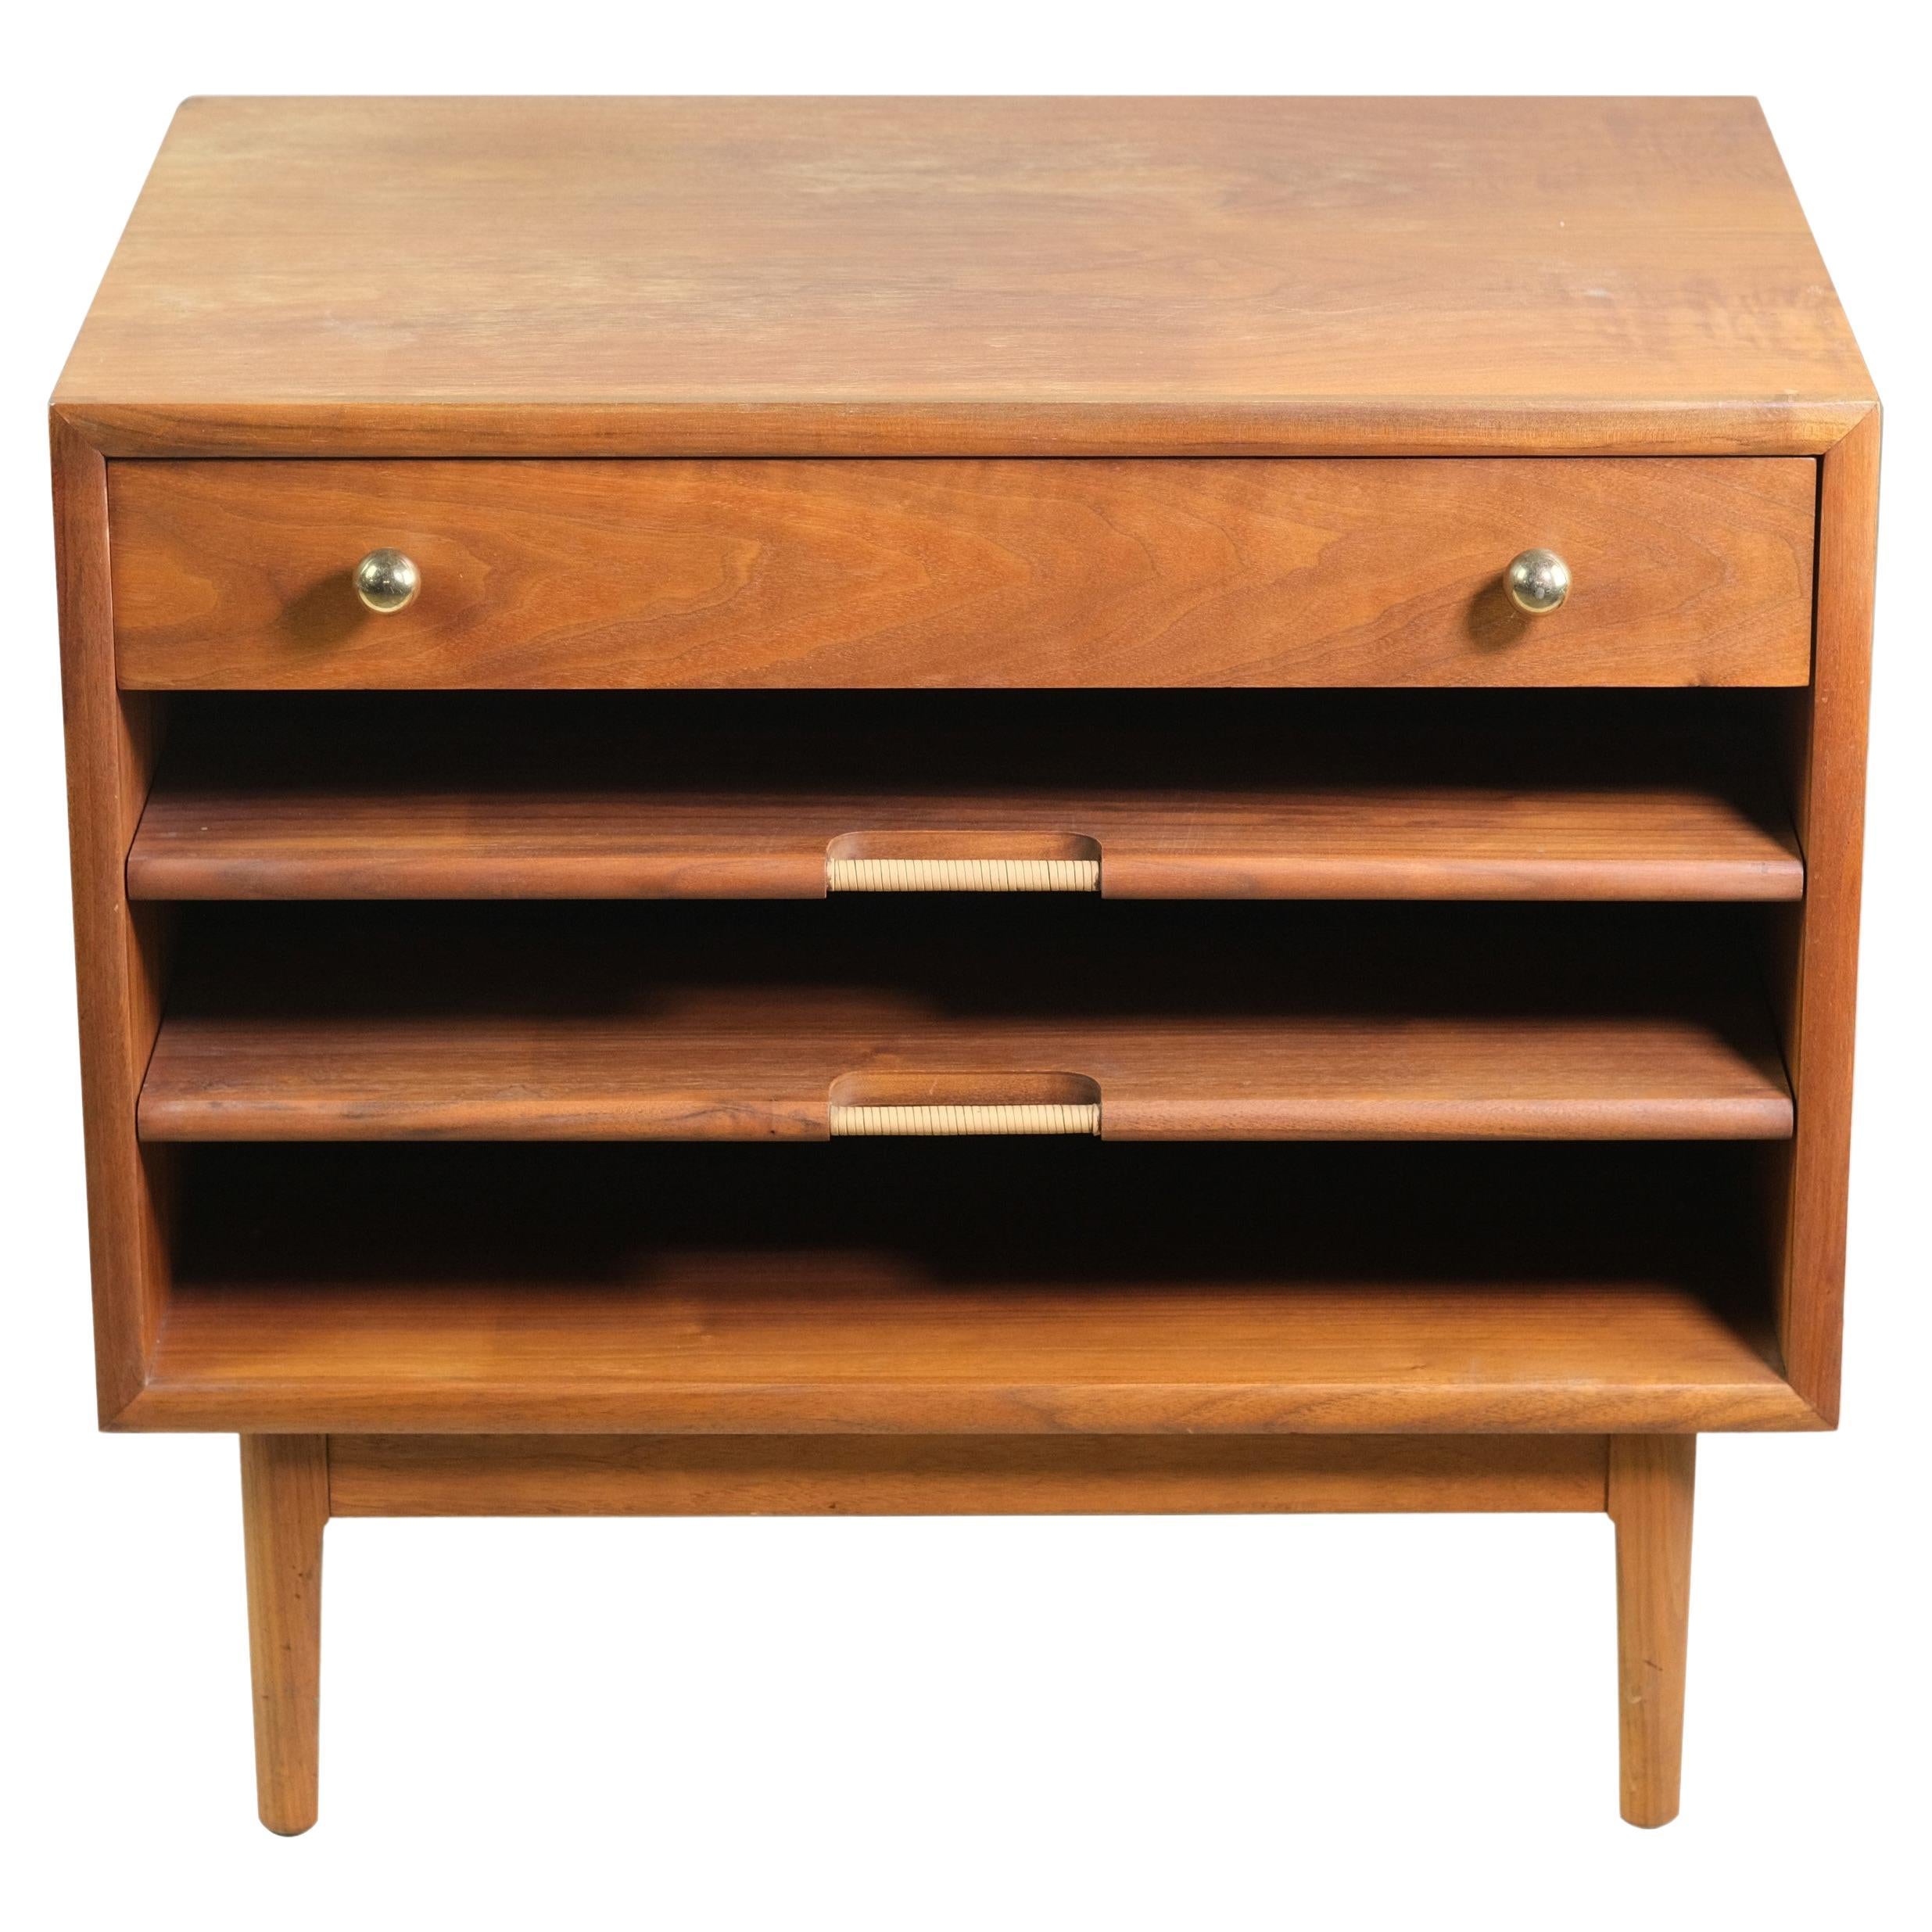 Drexel Walnut End Table One Drawer 2 Pull-Out Shelves For Sale